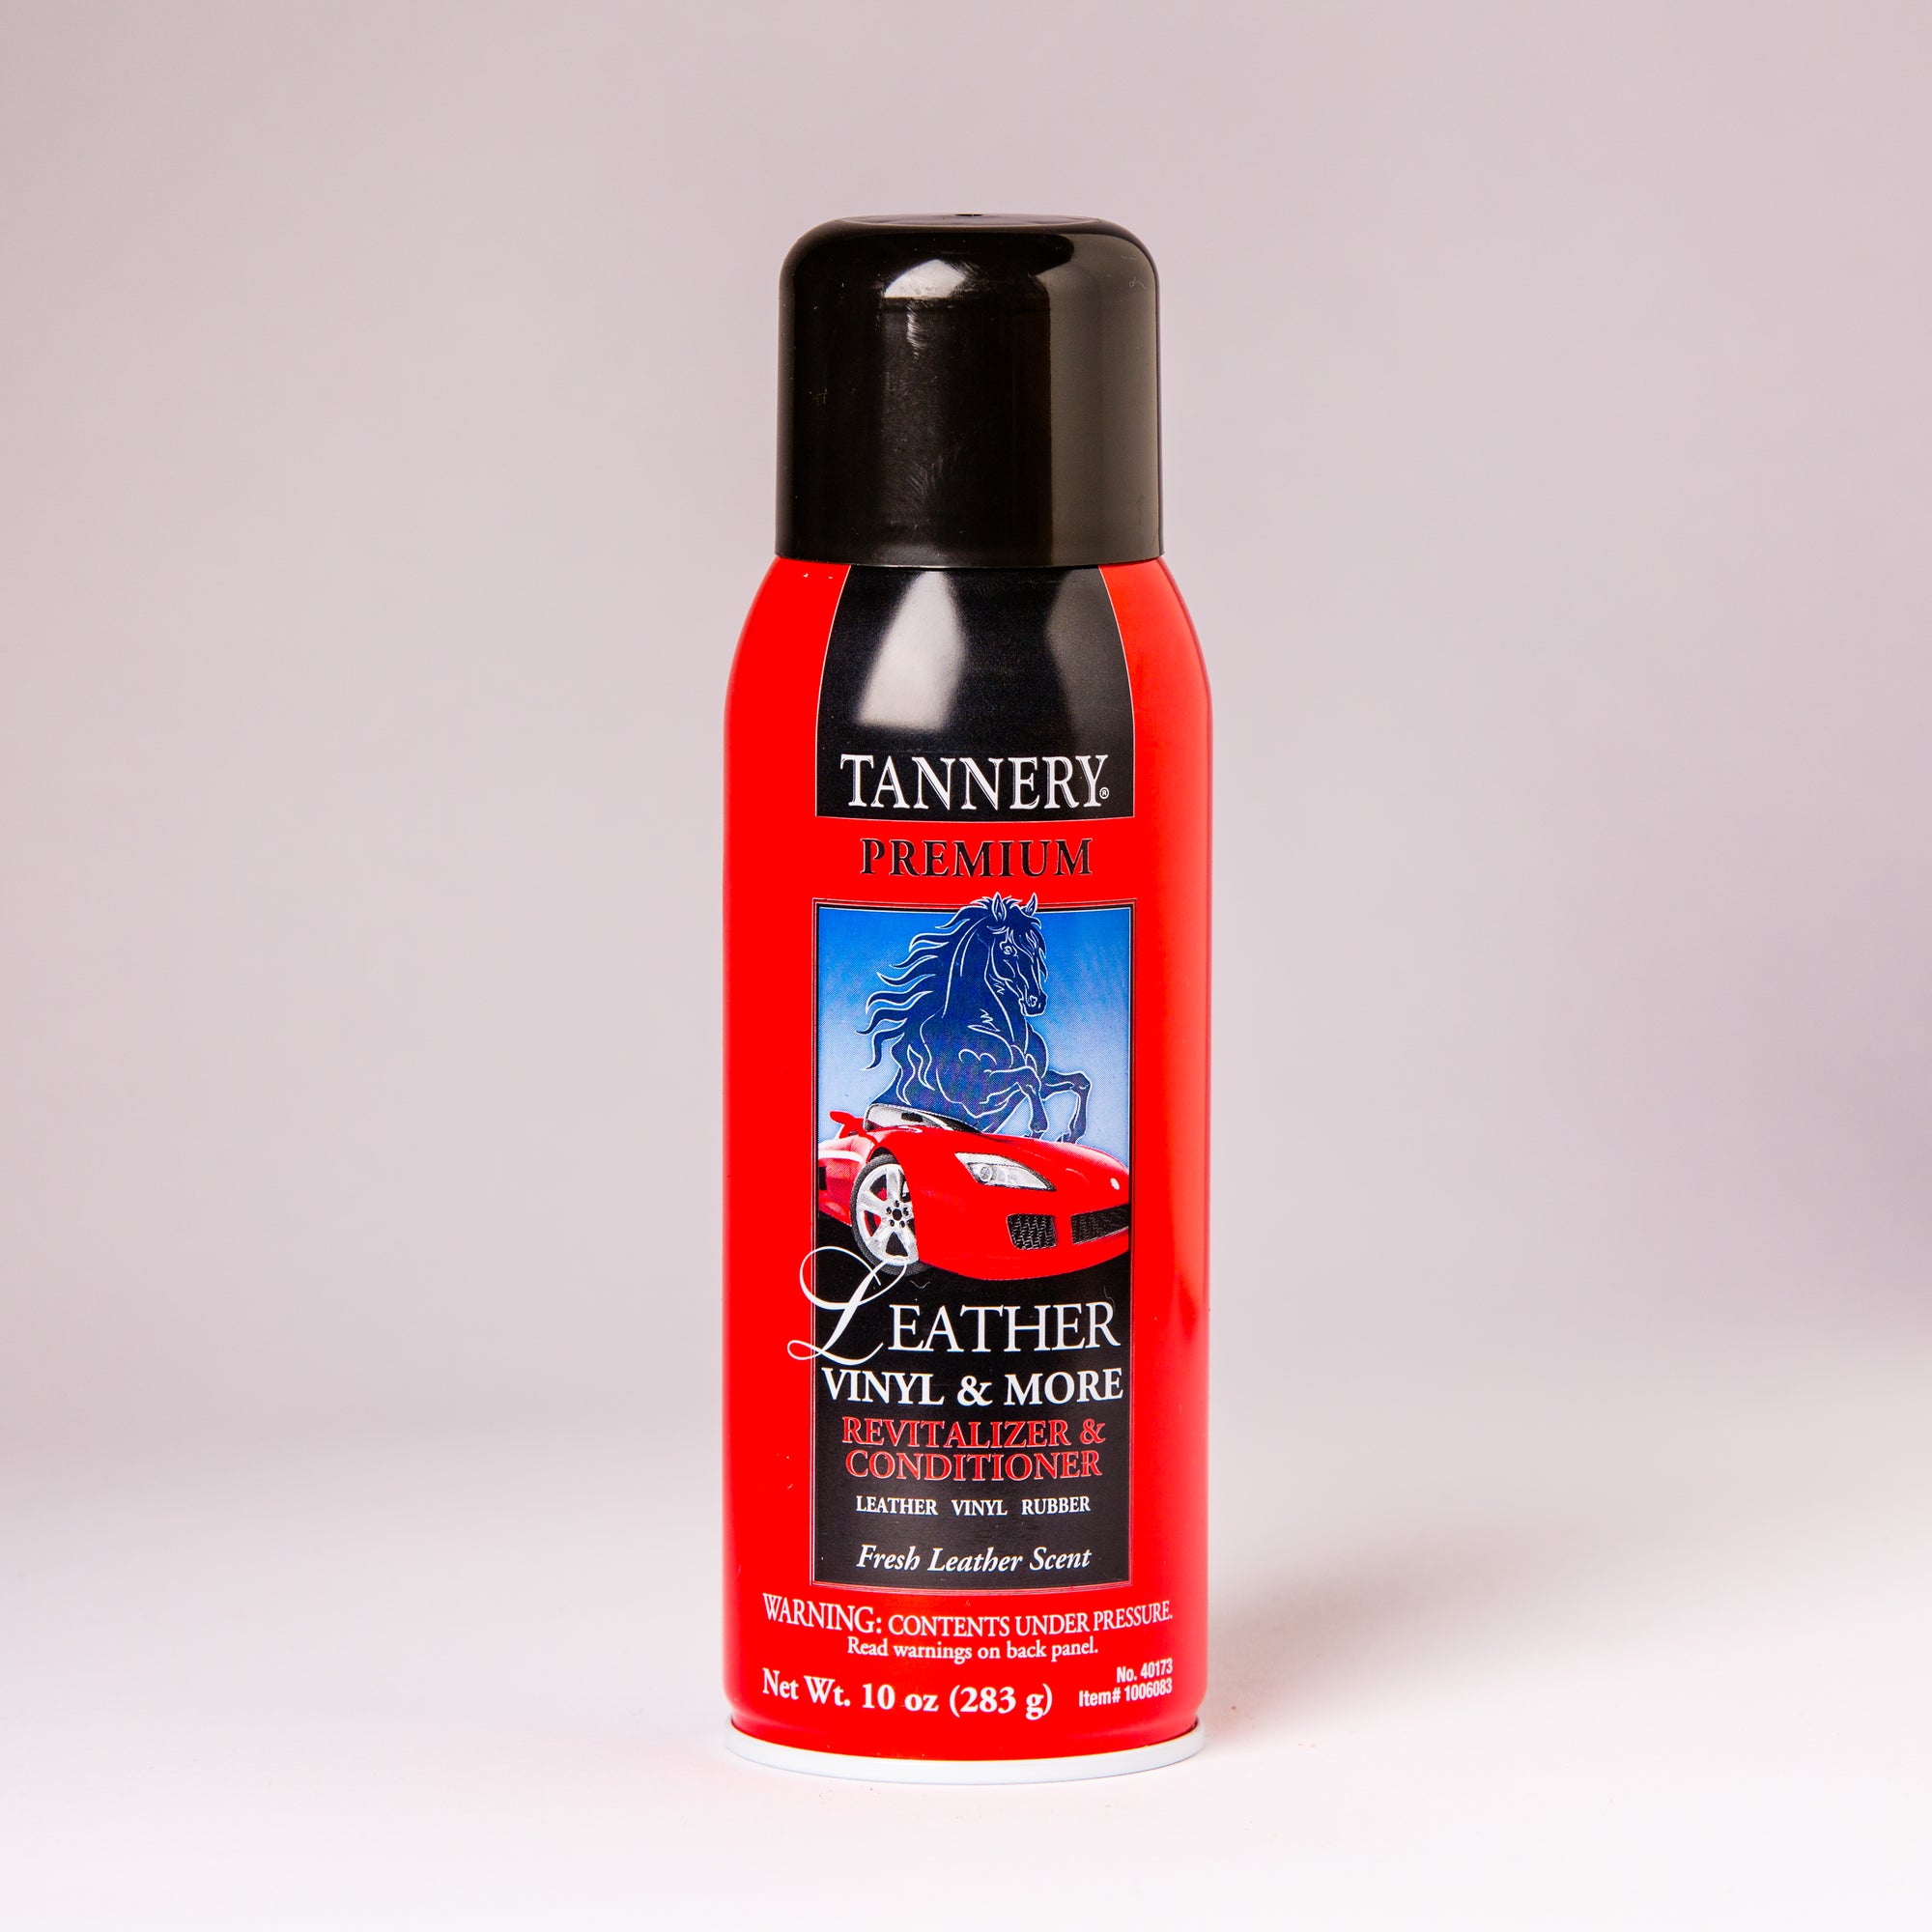 Tannery Leather and Vinyl Cleaner and Conditioner